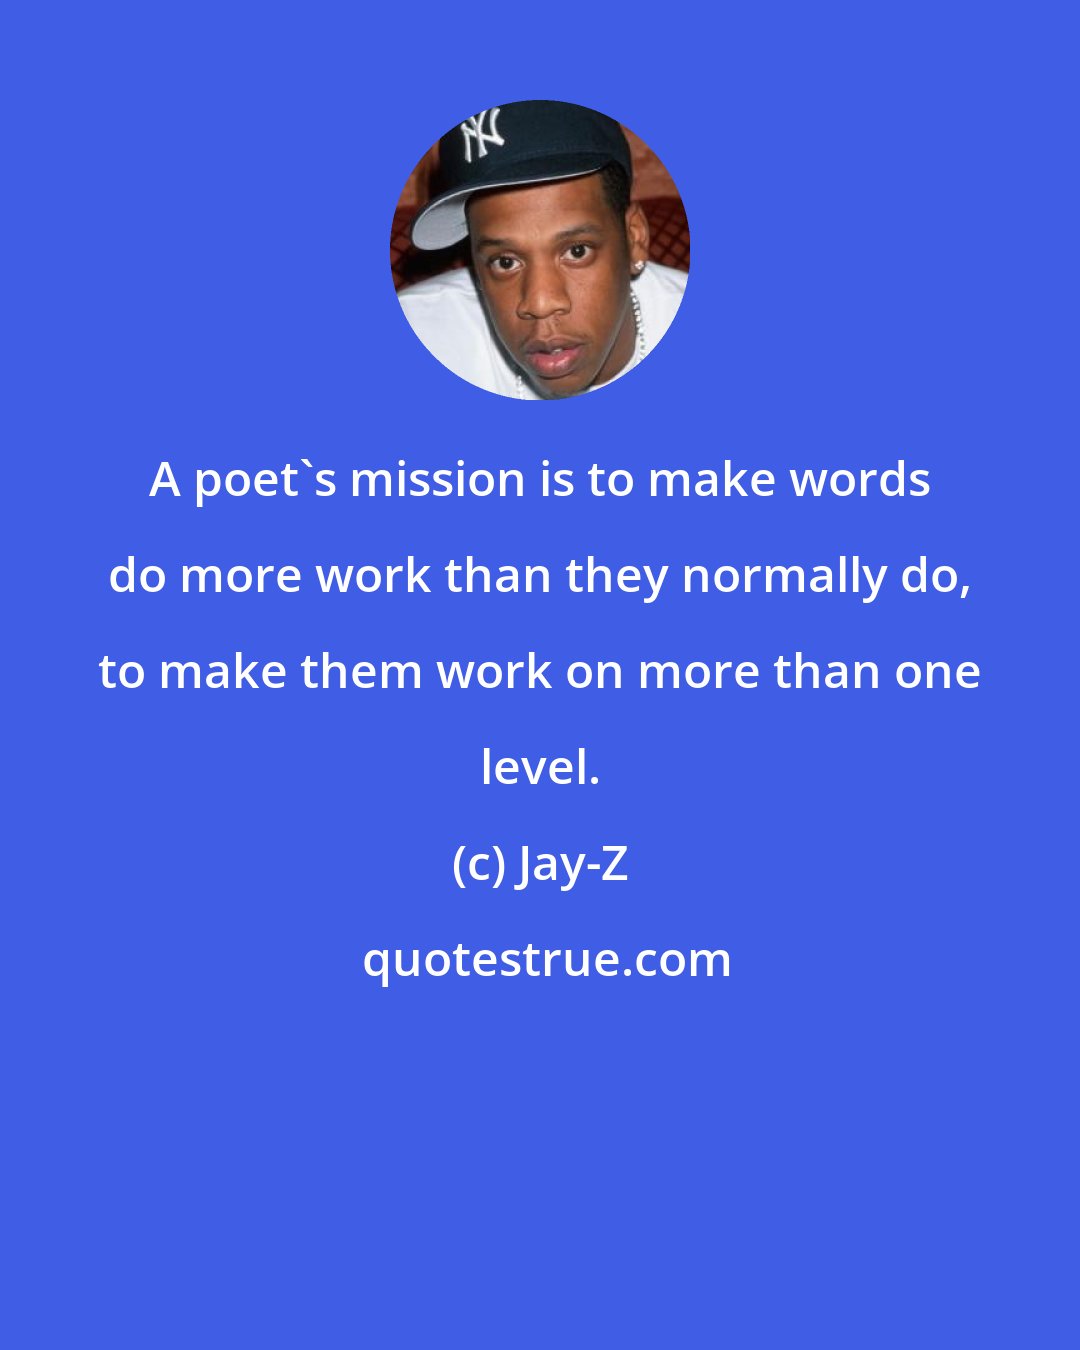 Jay-Z: A poet's mission is to make words do more work than they normally do, to make them work on more than one level.